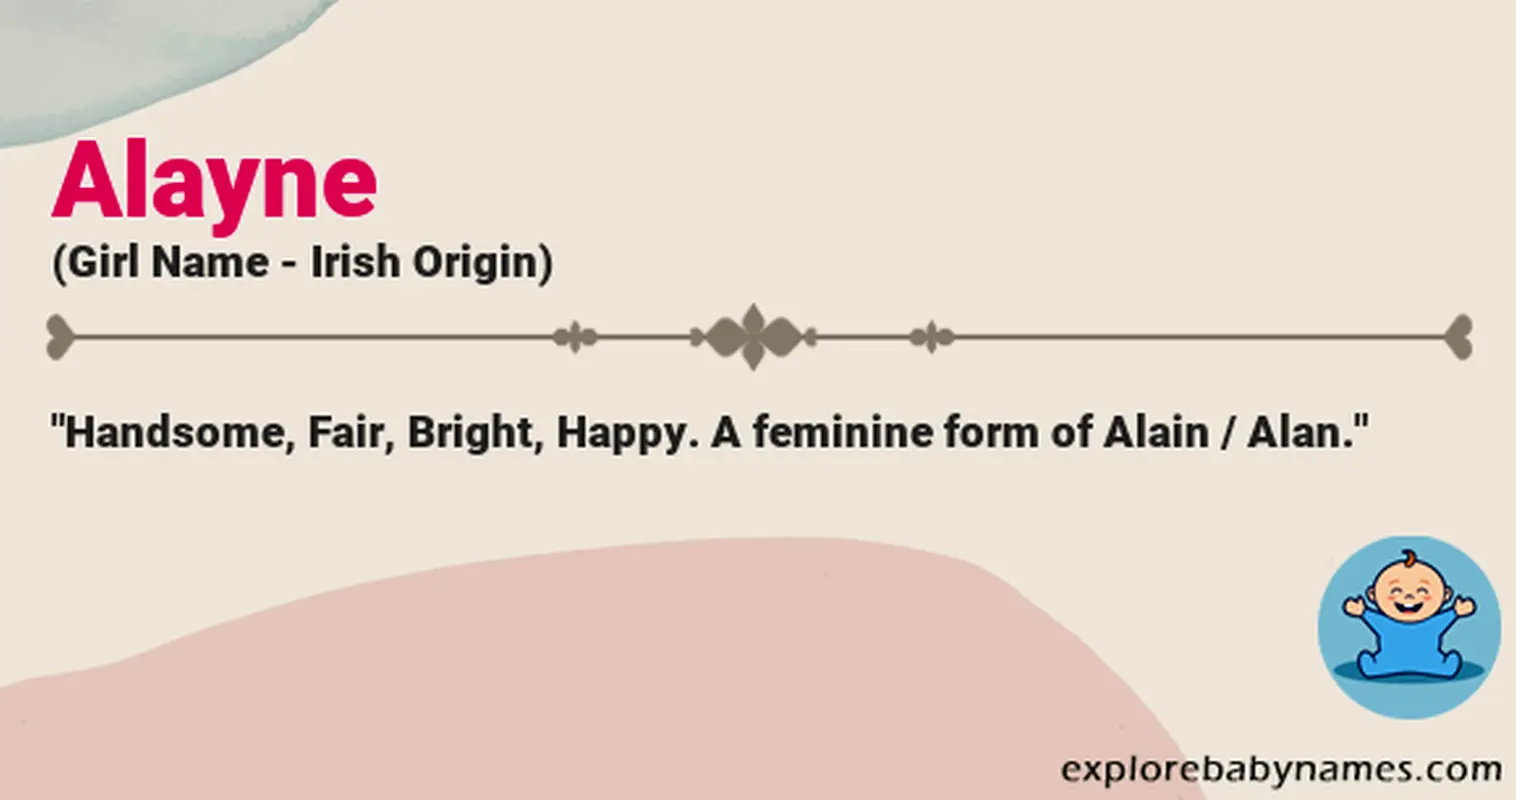 Meaning of Alayne